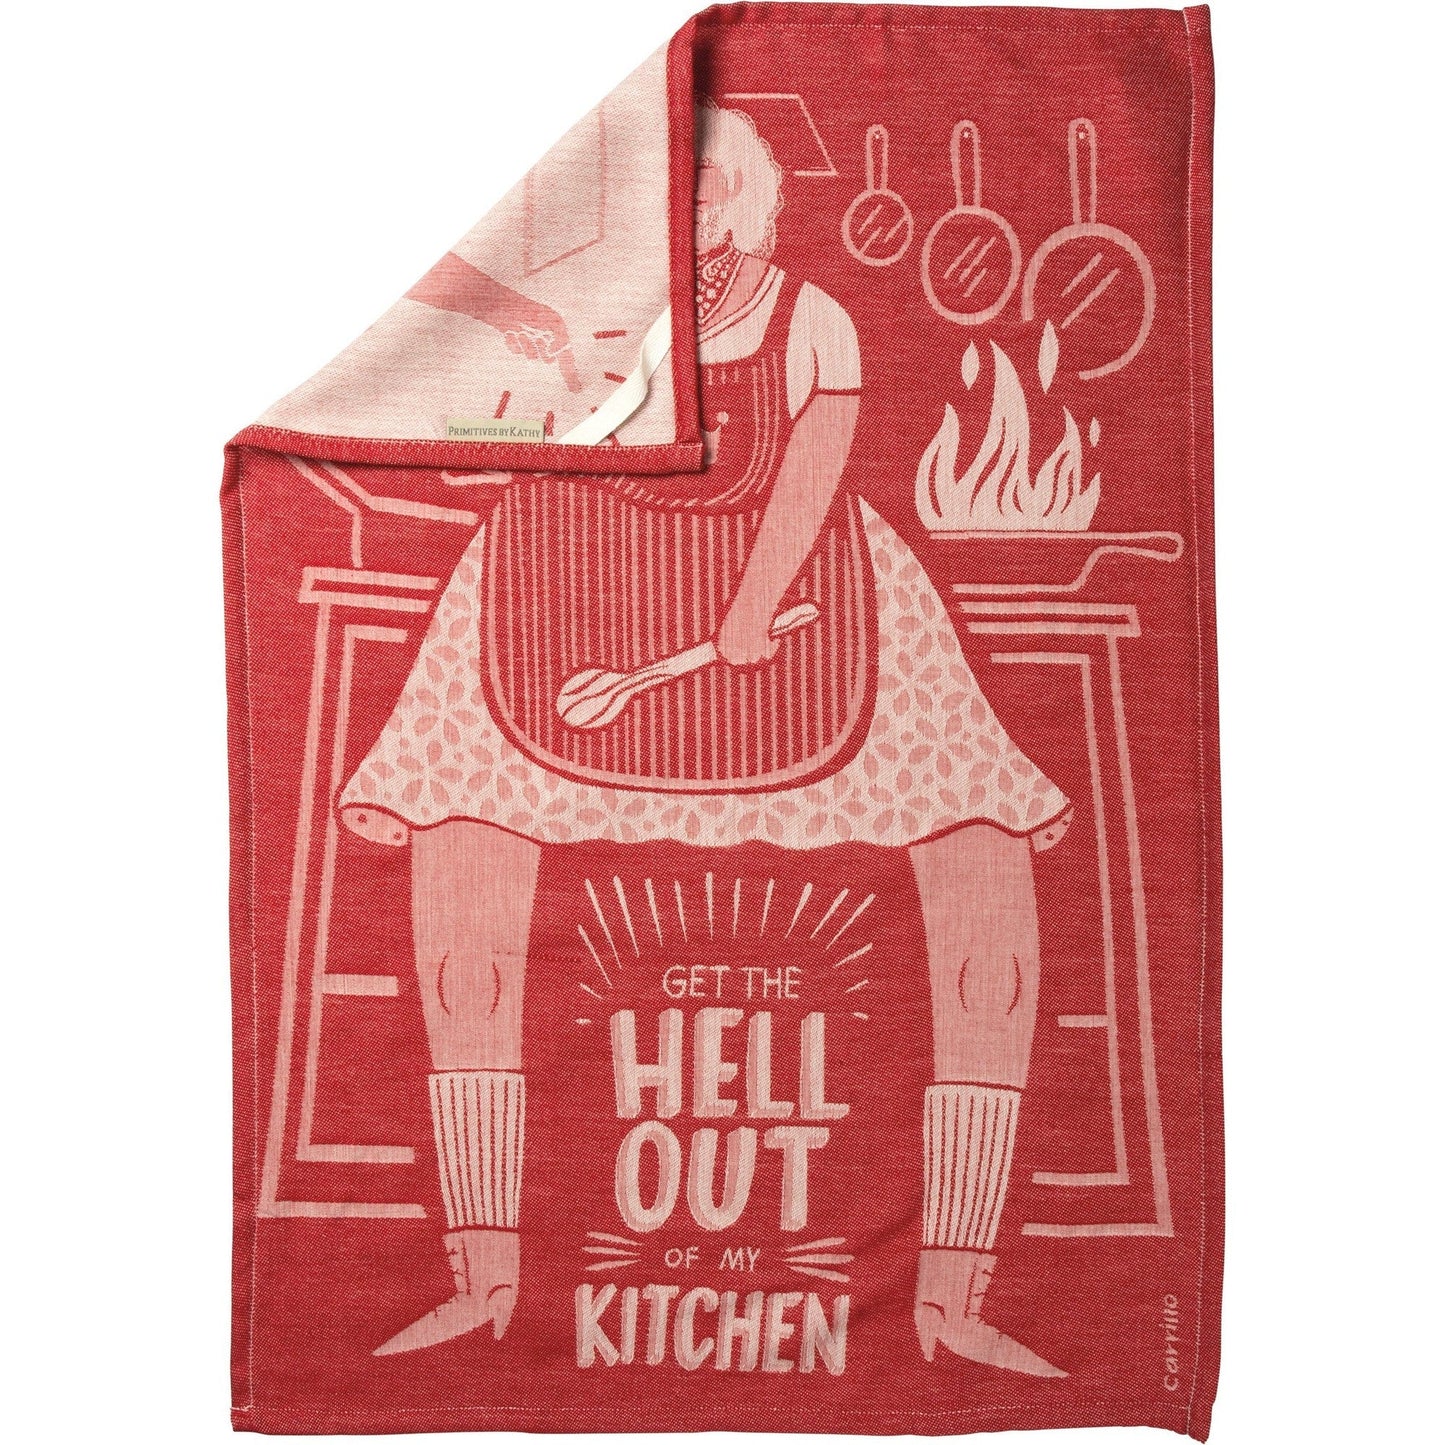 Get The Hell Out of My Kitchen Dish Cloth Towel | Novelty Tea Towel | Cute Kitchen Hand Towel | 20" x 28"